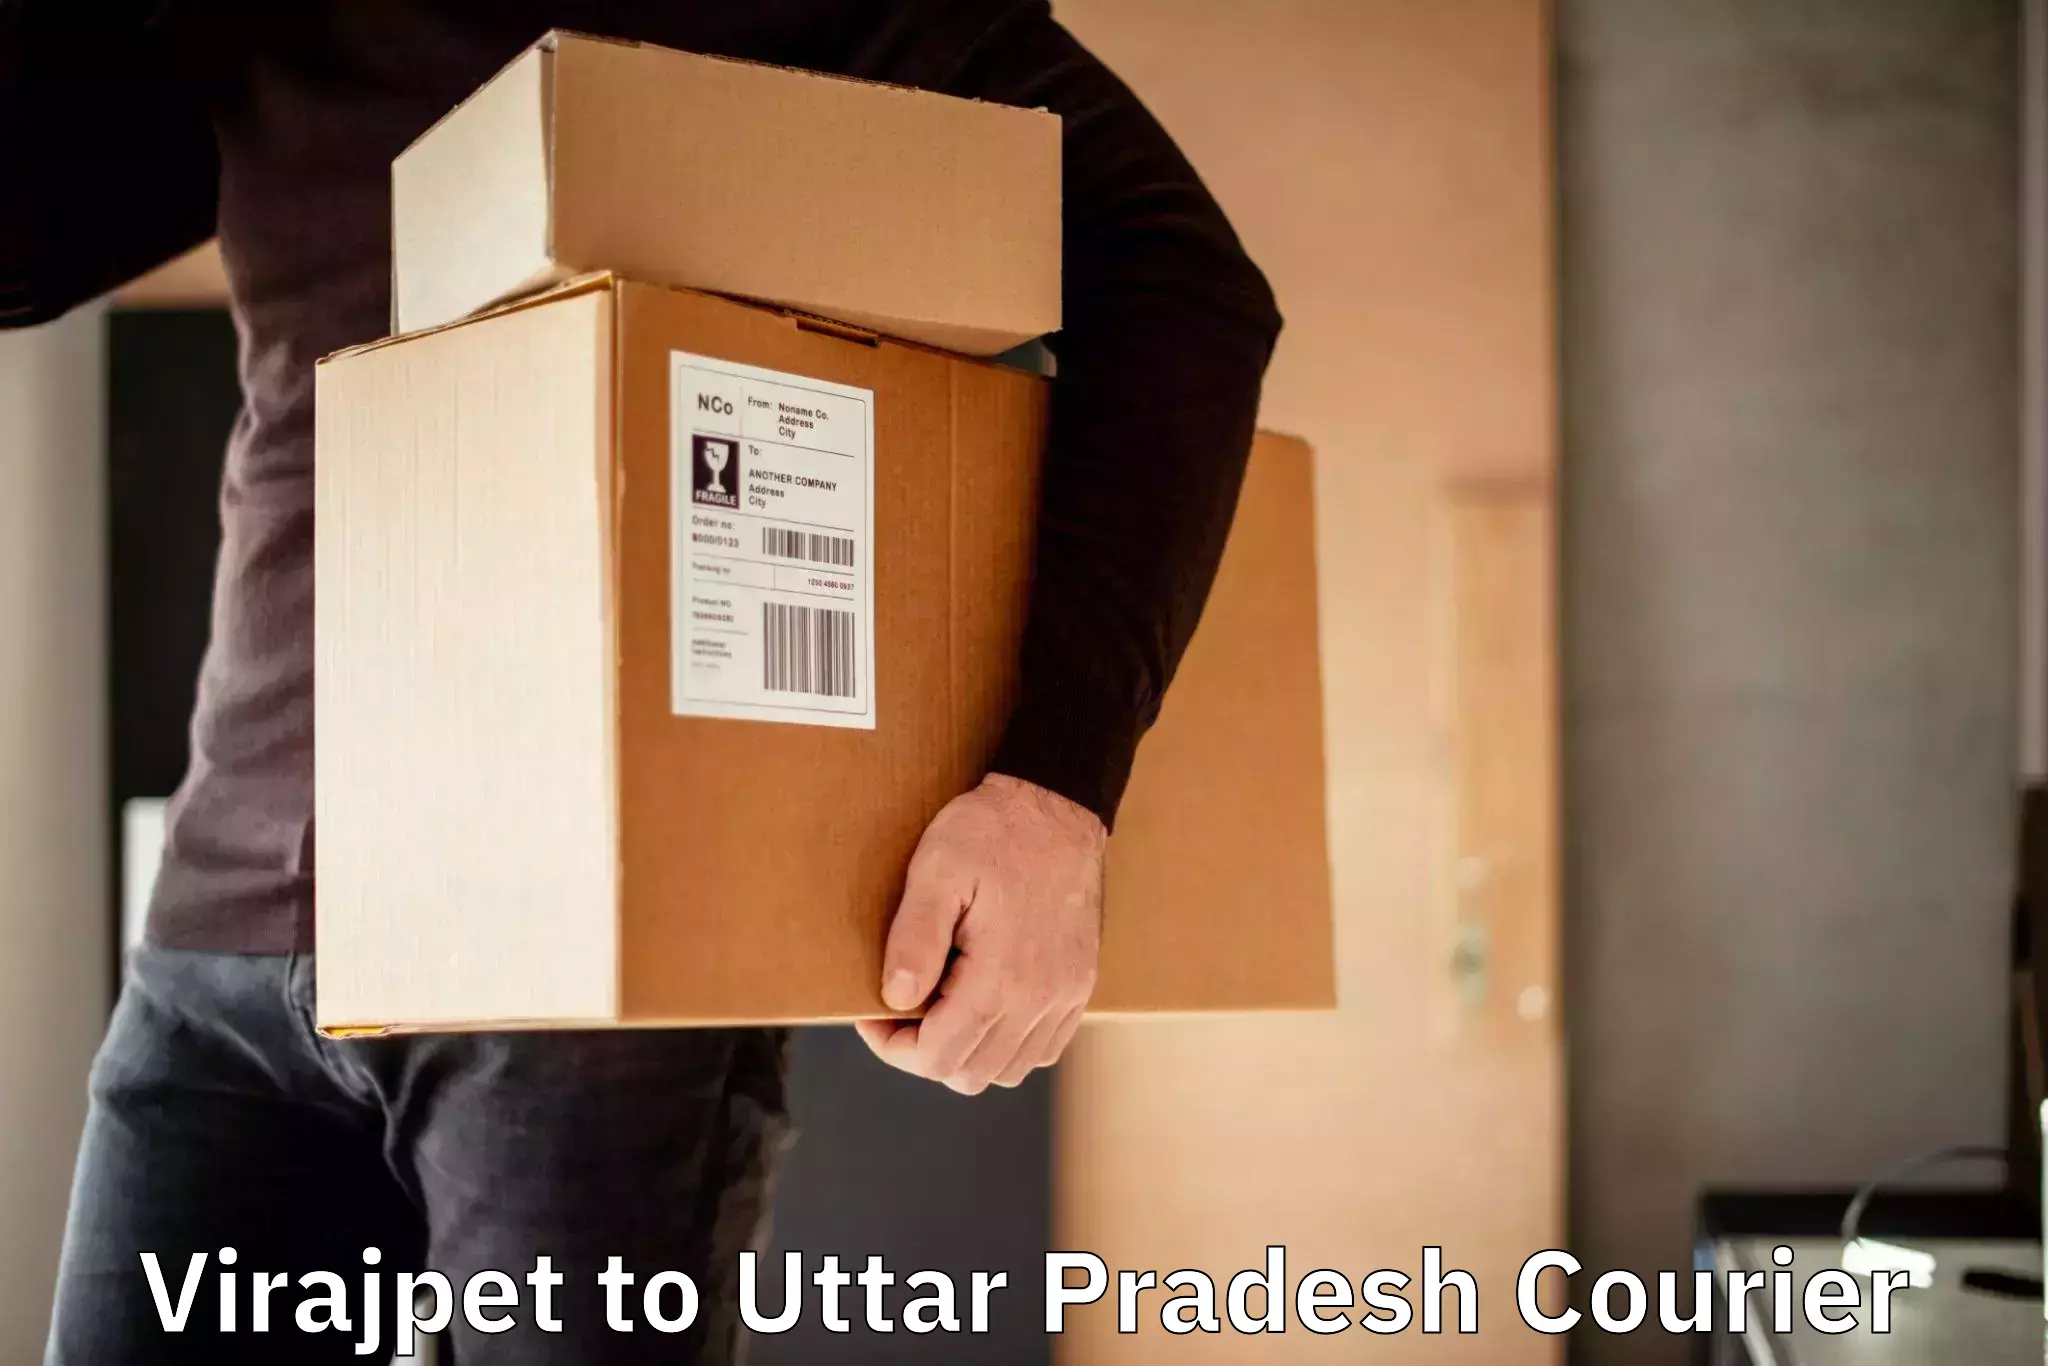 State-of-the-art courier technology Virajpet to Rajesultanpur